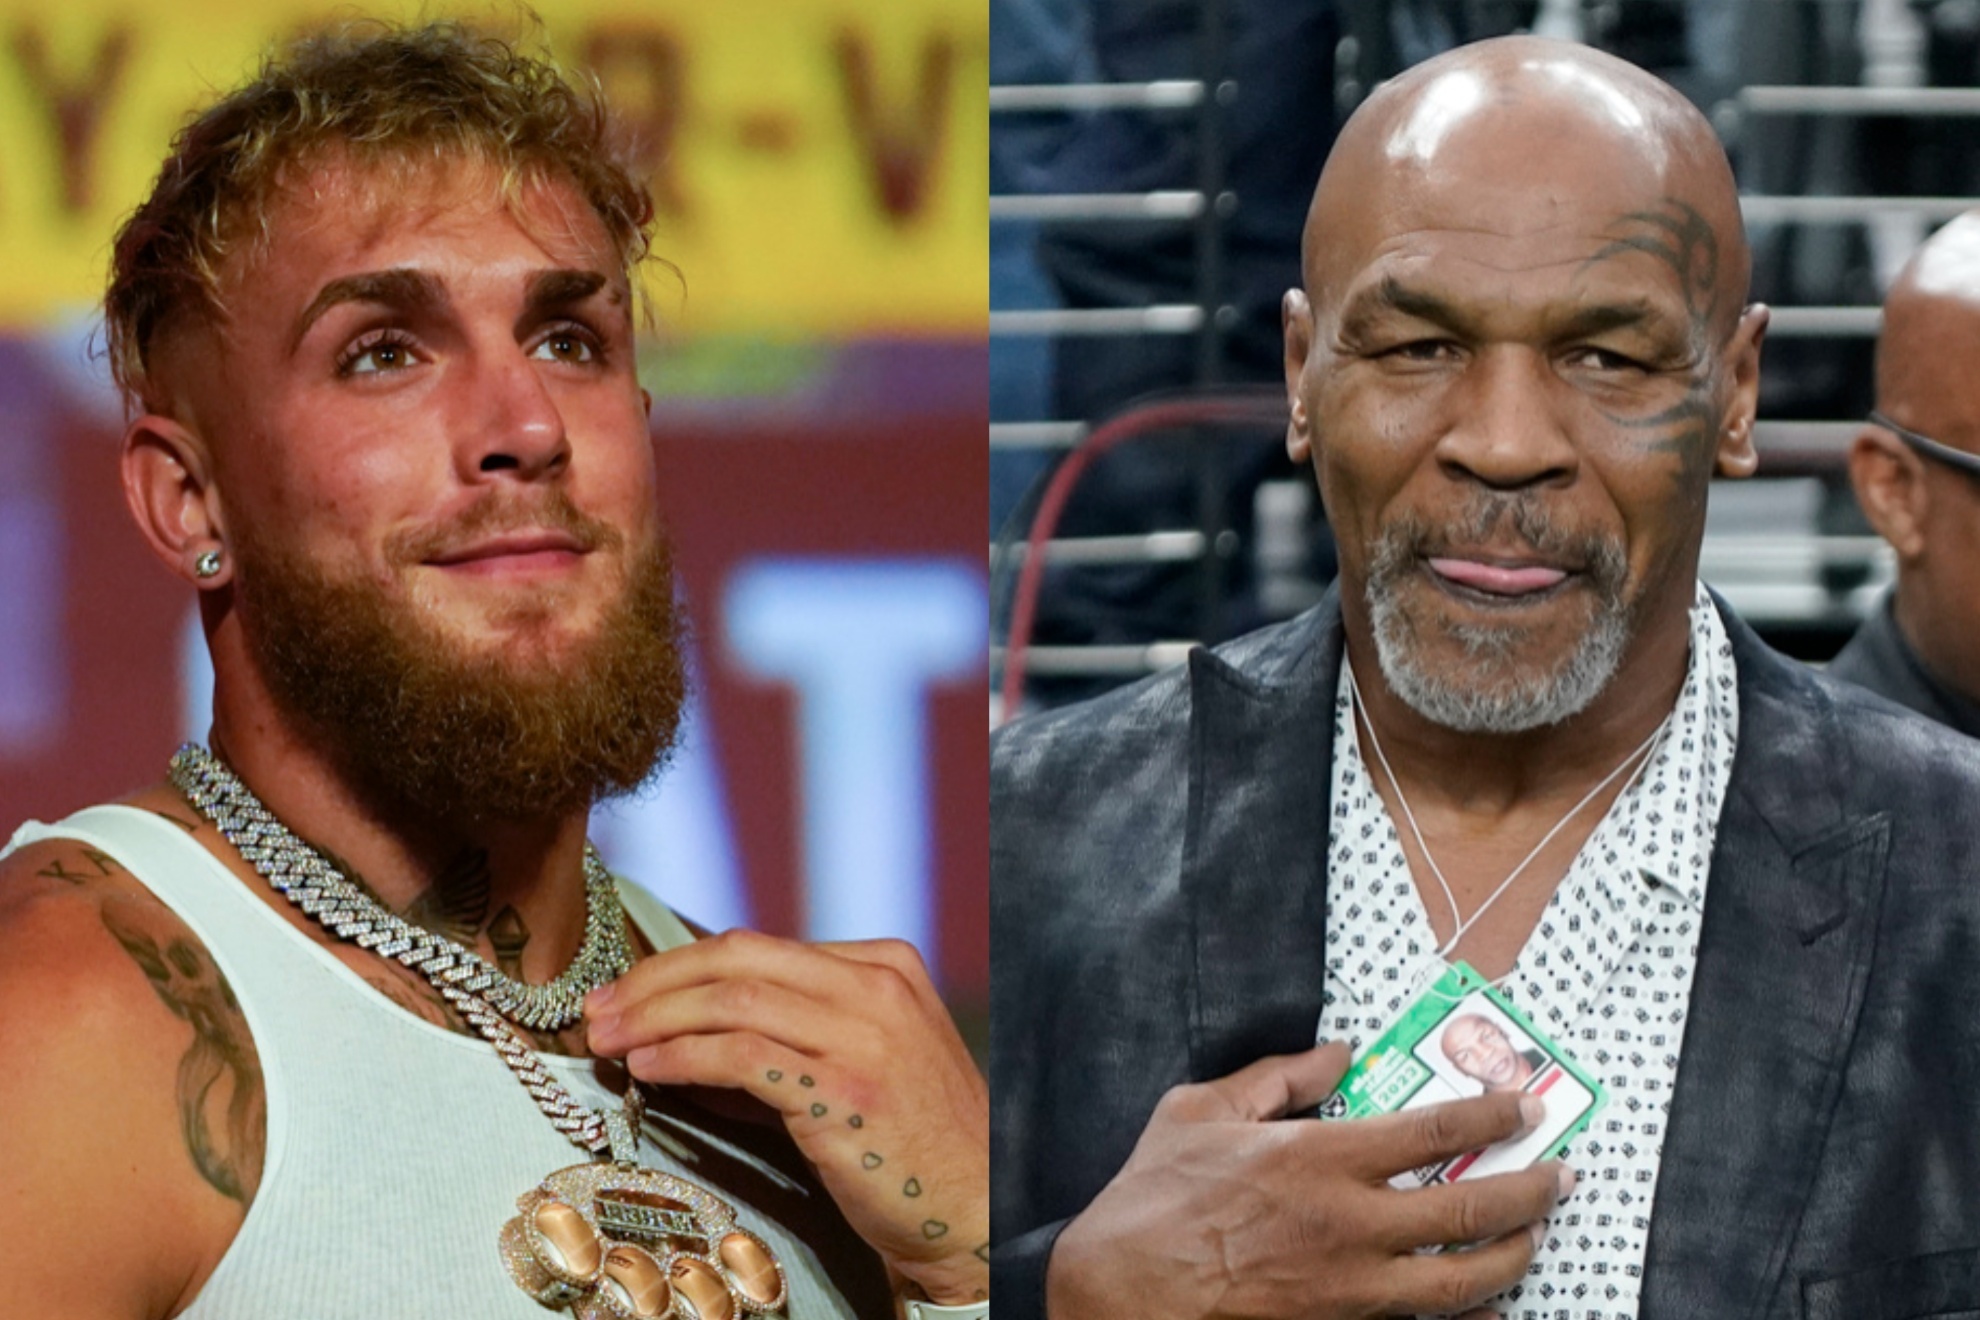 Mike Tyson and Jake Paul will face each other in the ring in July